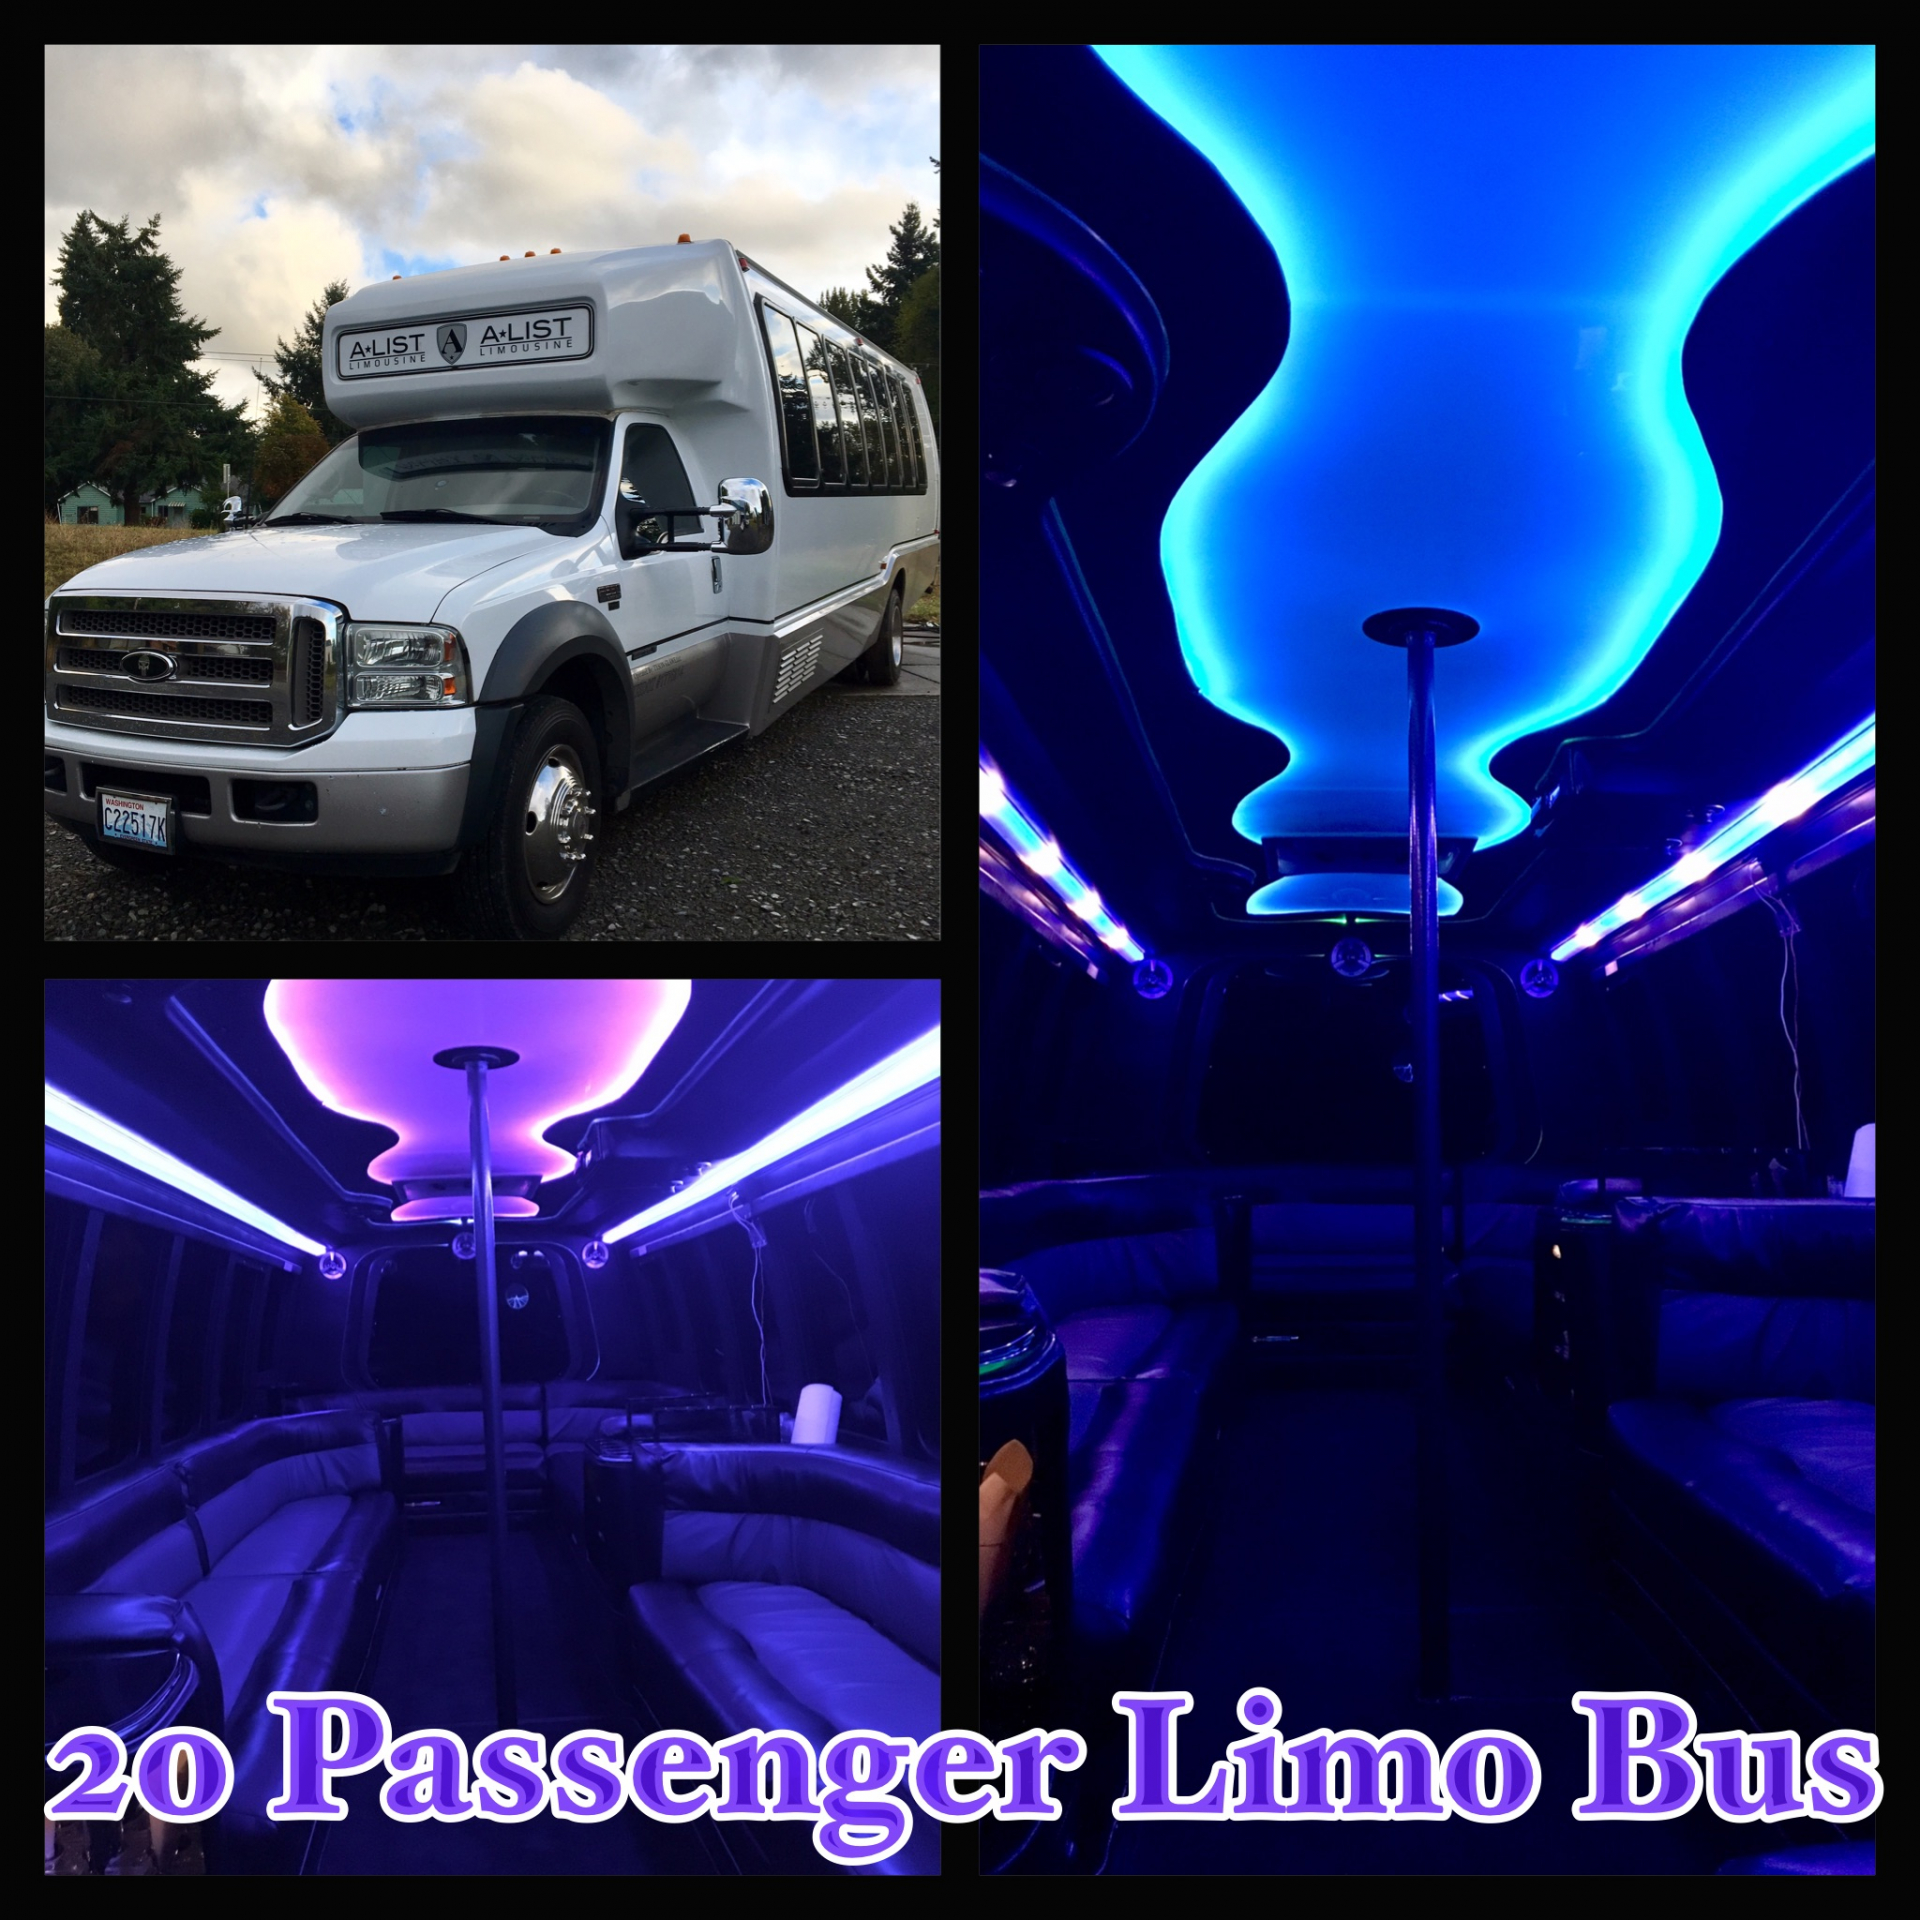 Limo bus
Party Limo Bus /
Portland, OR

 / Hourly (Other services) $200.00
 / Hourly $200.00
